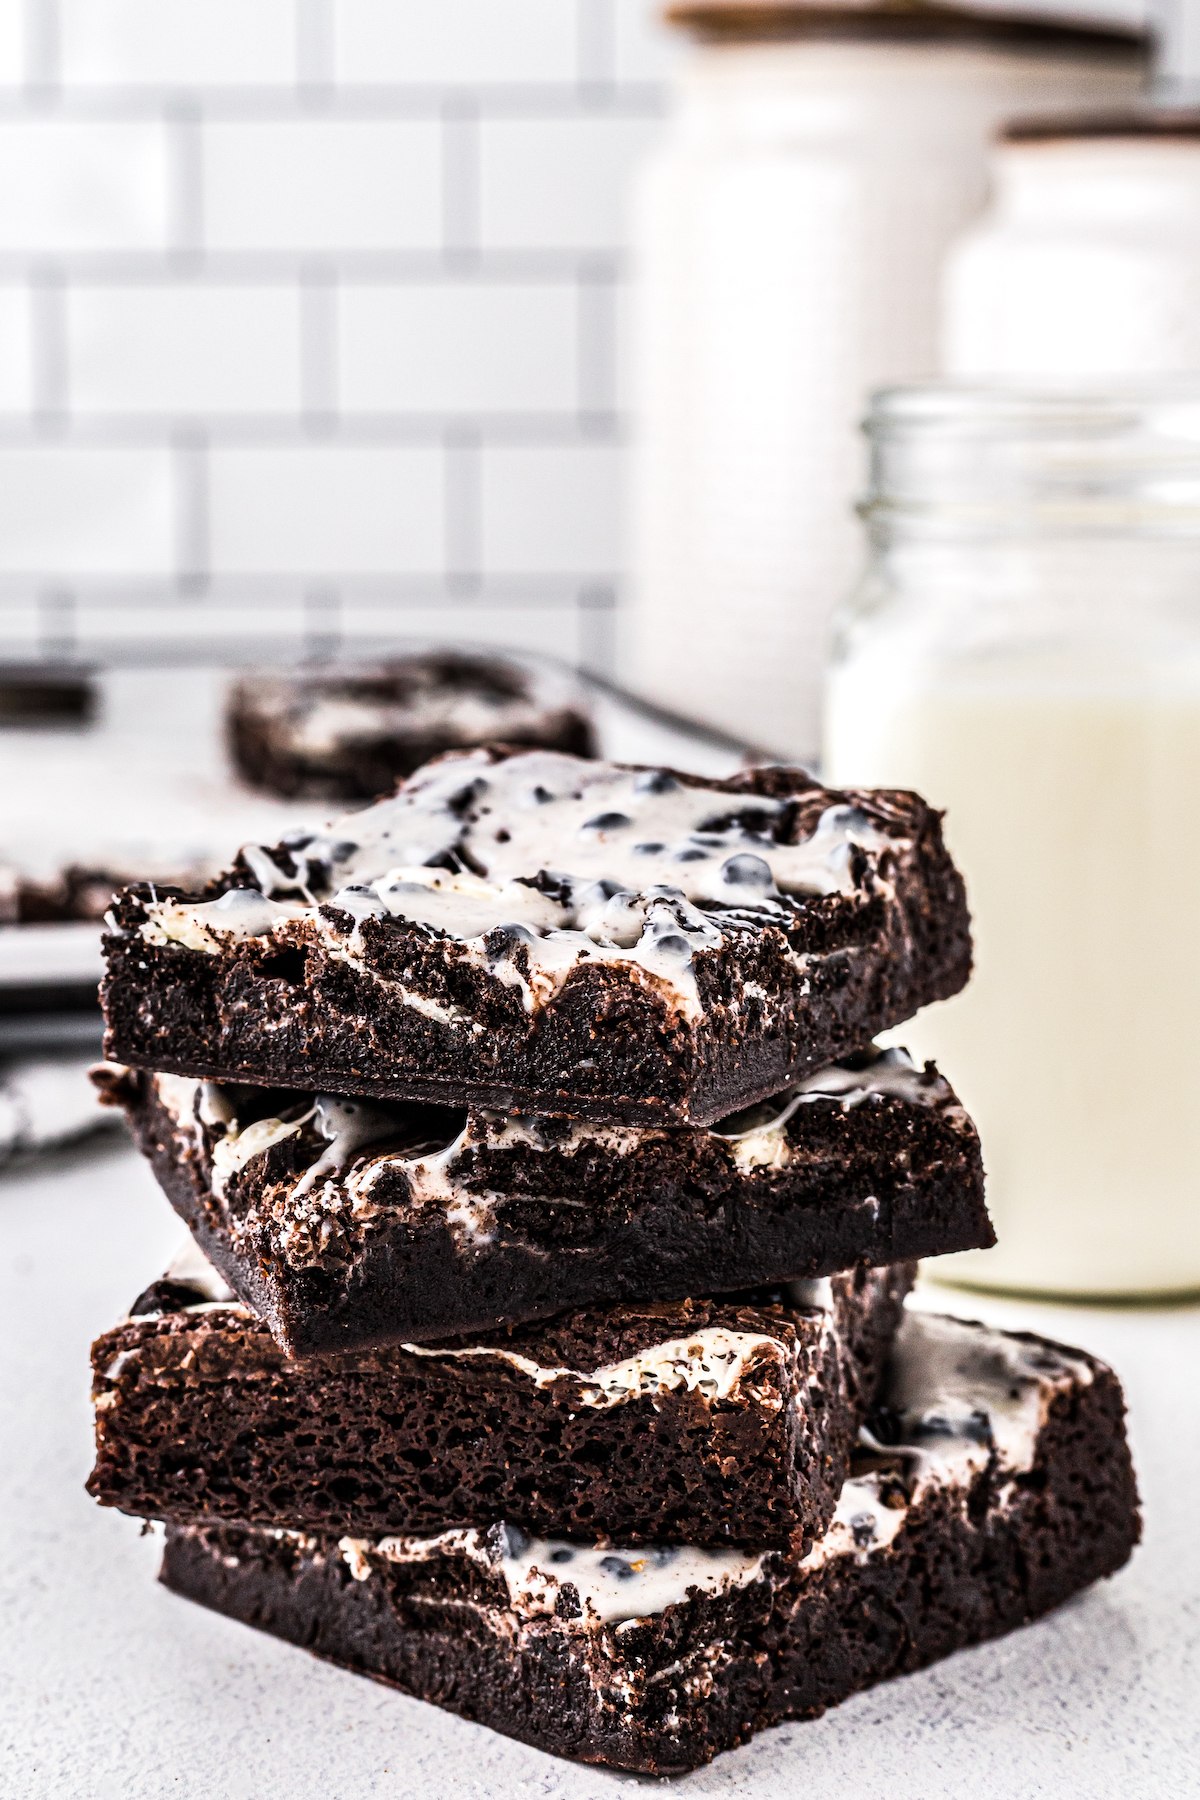 A stack of iced brownies on a countertop, with canisters of ingredients in the background.